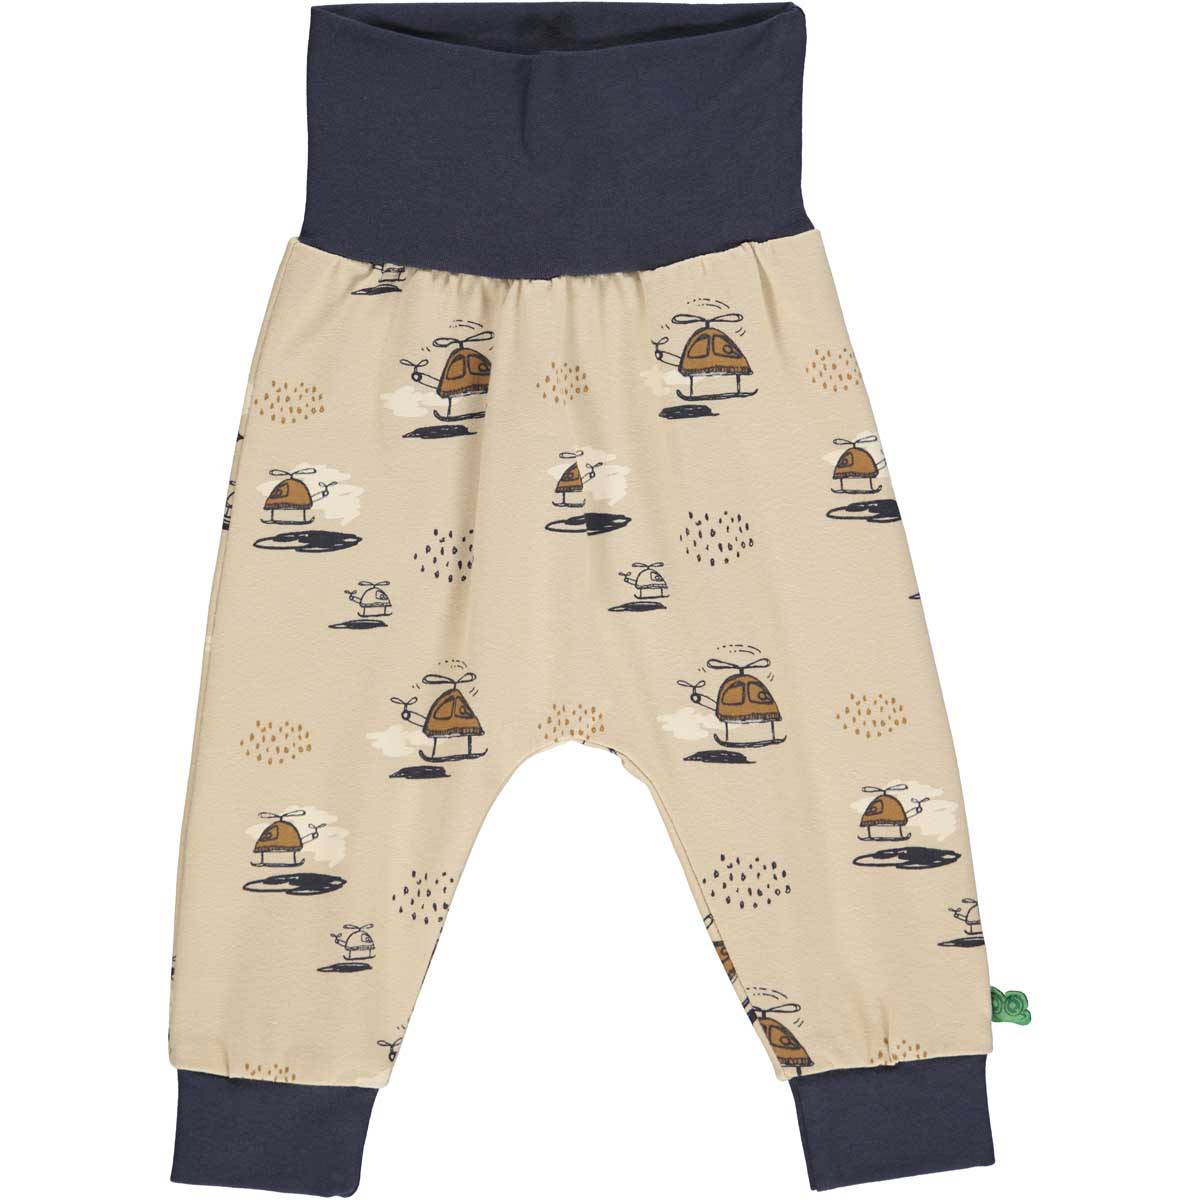 Fred's World organic Baby pants- helicopter print